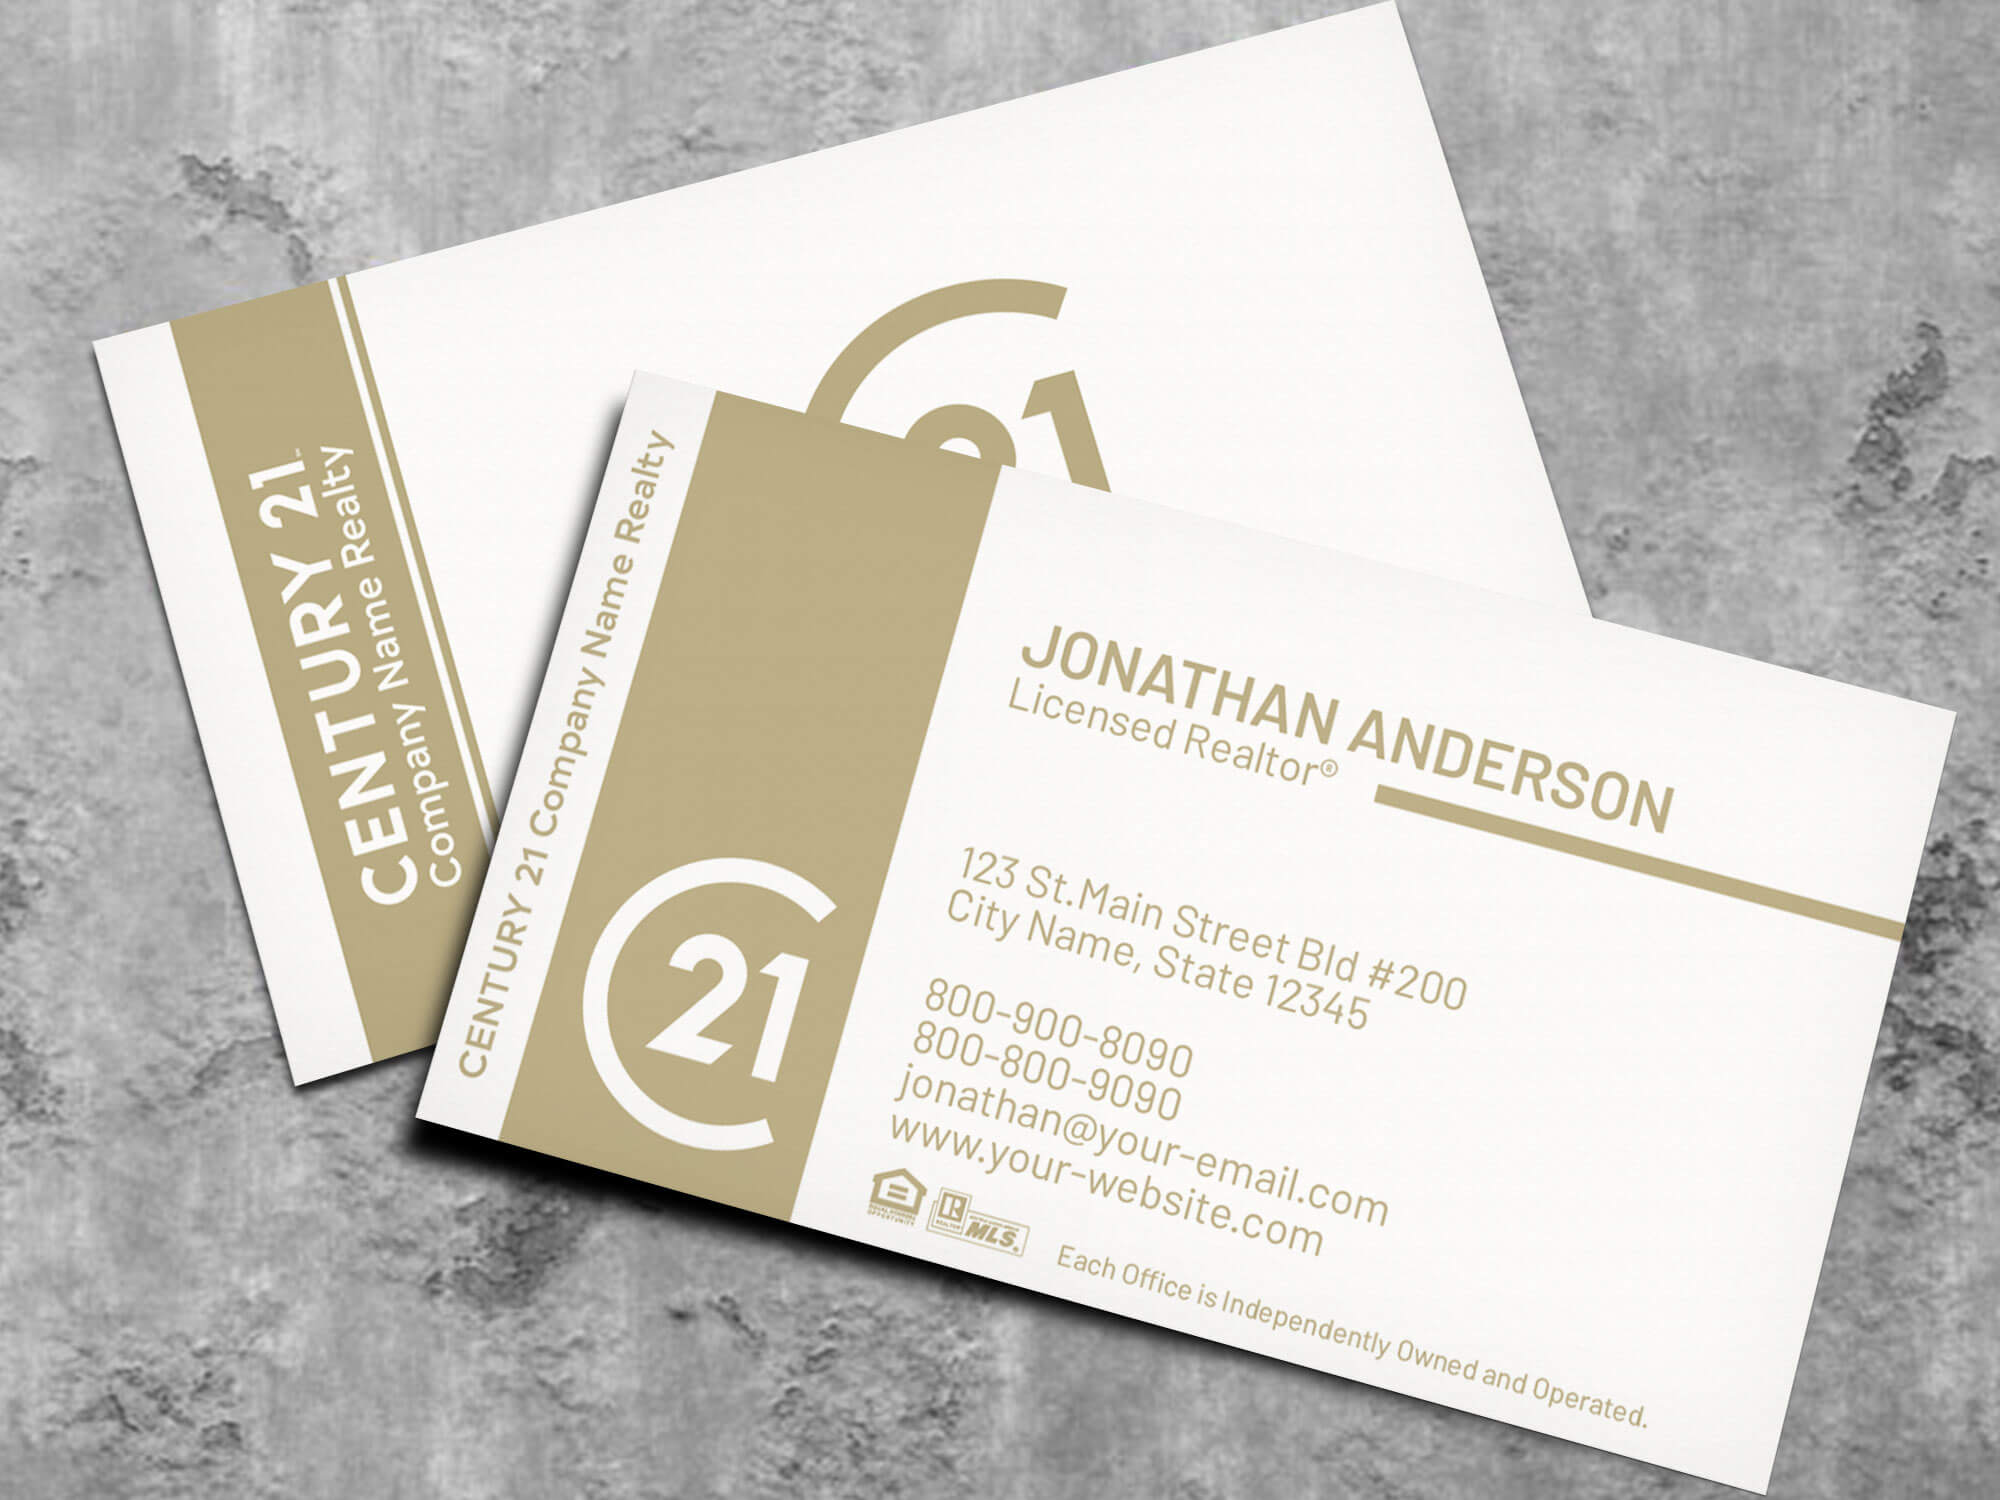 Century 21 Business Card Template 18030Wg – Nusacreative With Regard To Coldwell Banker Business Card Template